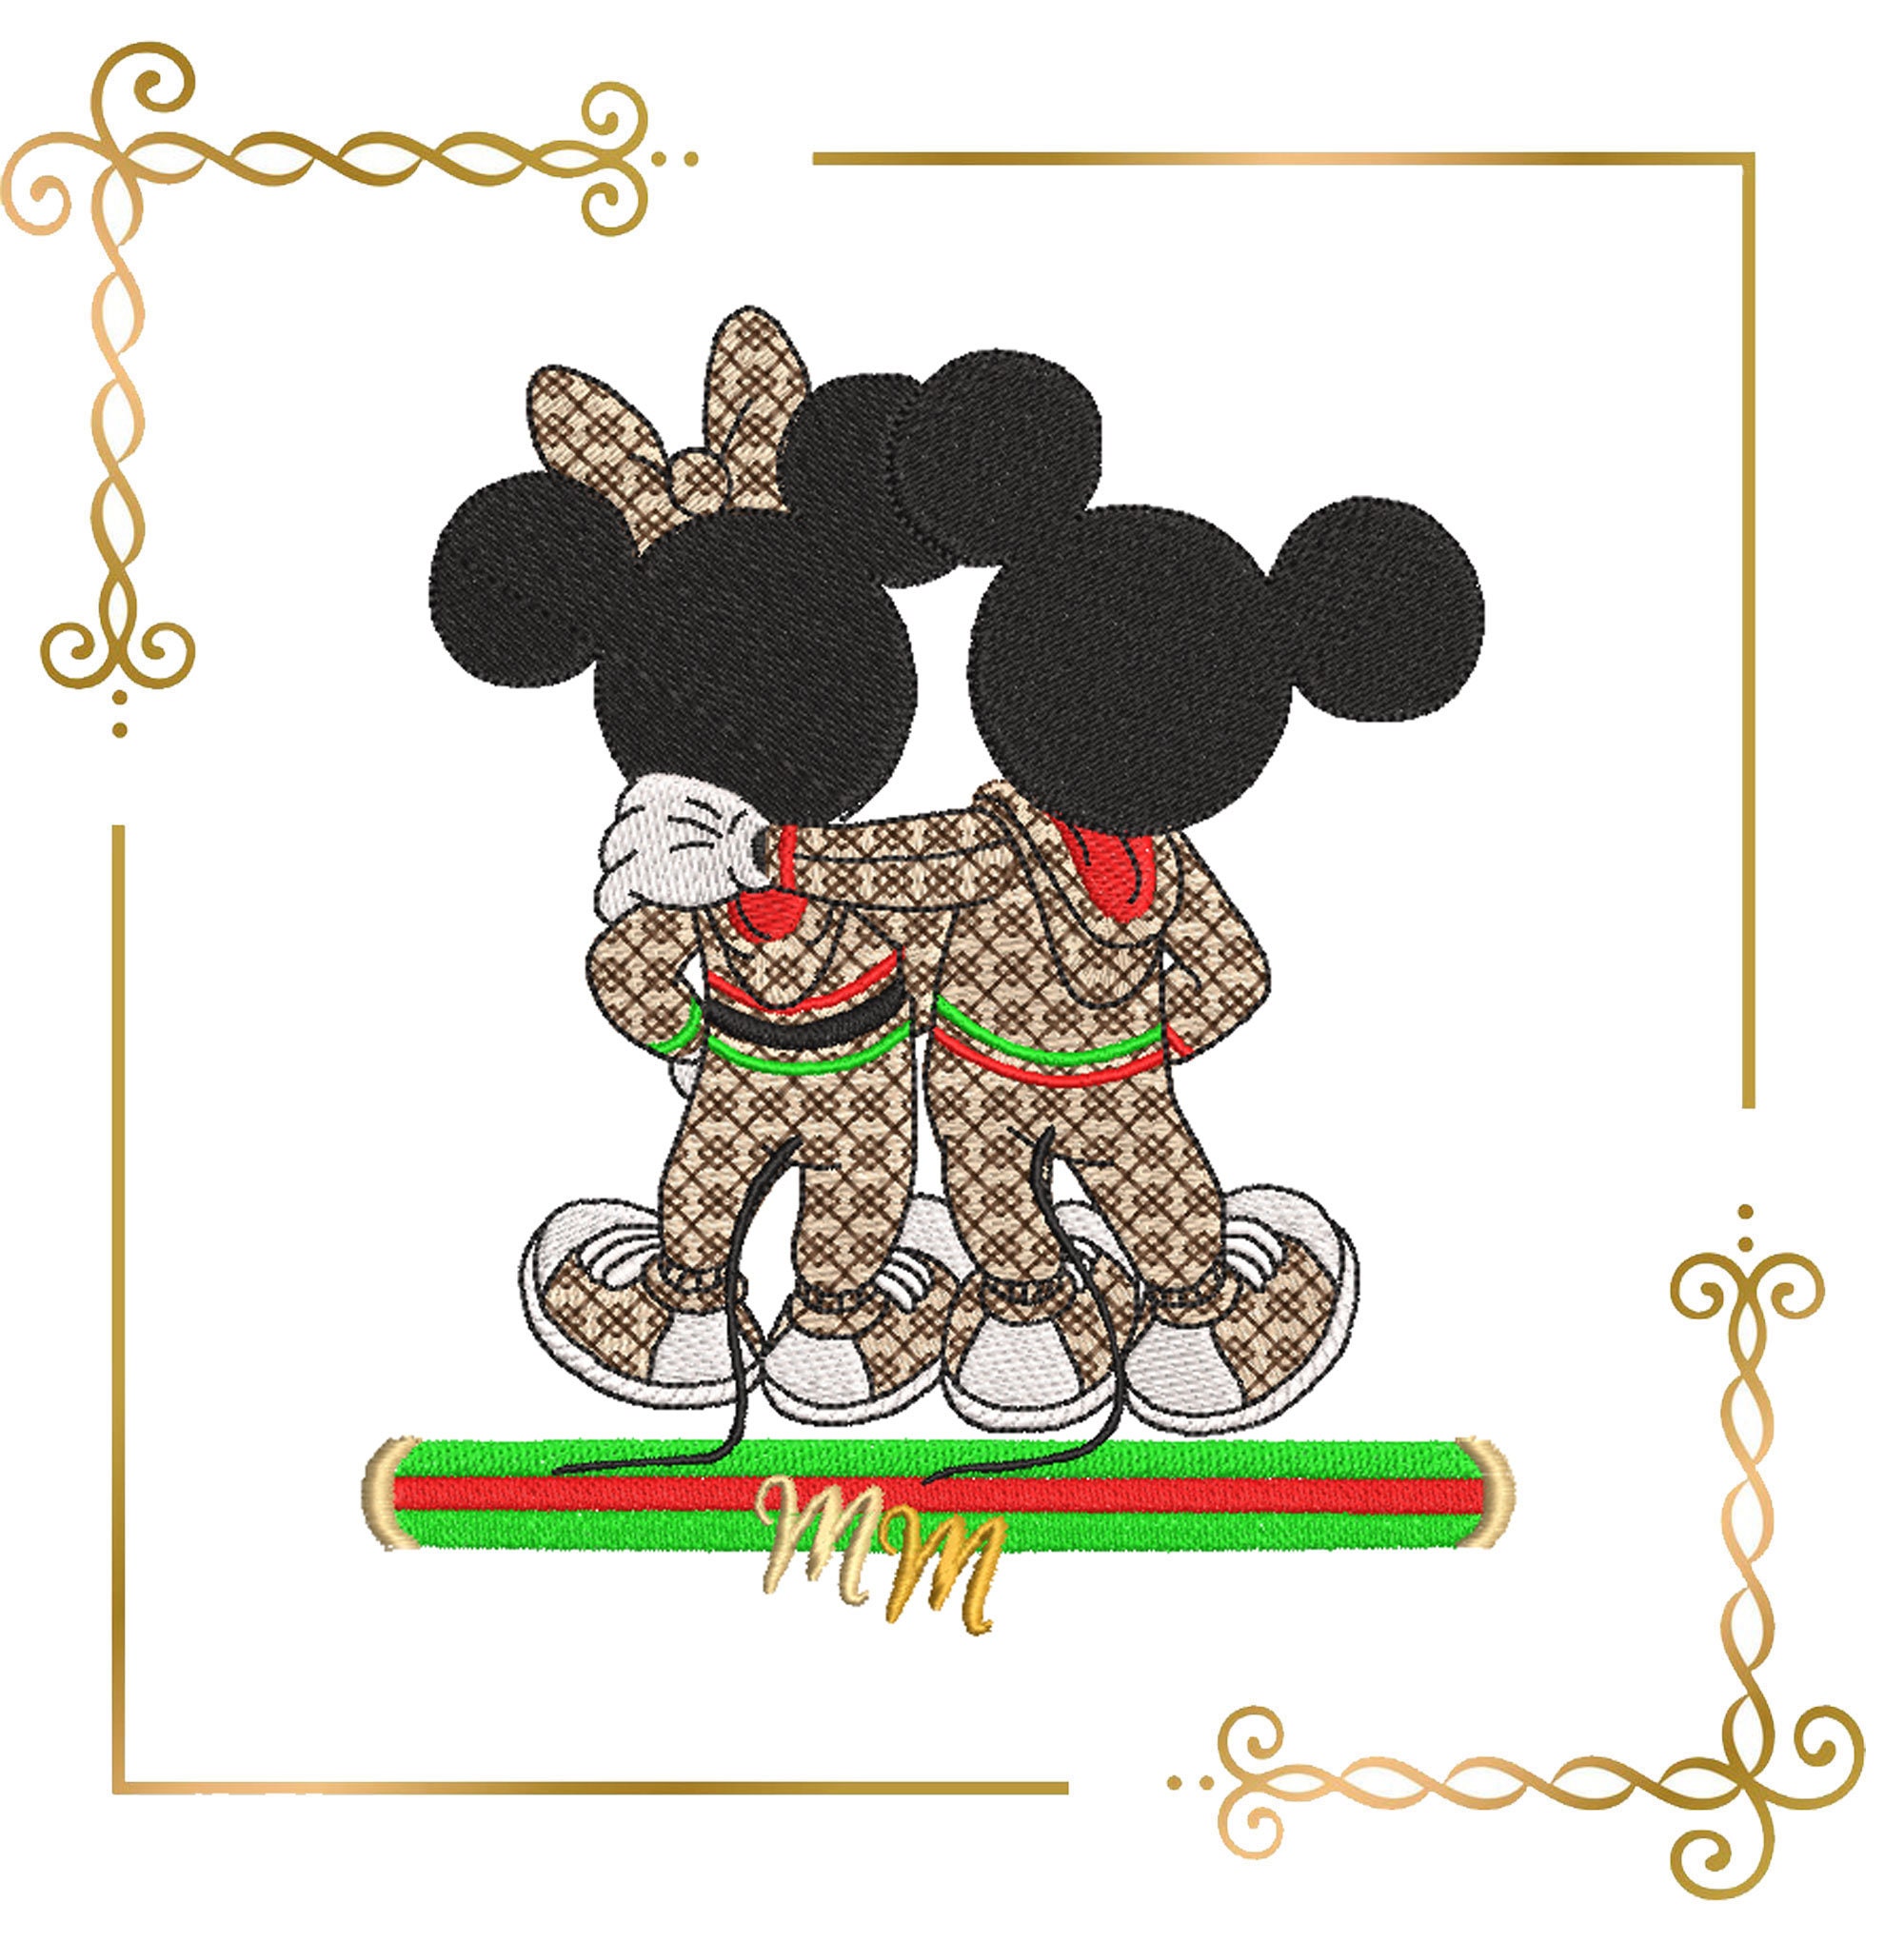 Minnie Mouse Gucci Style logo vector. Download free Minnie Mouse